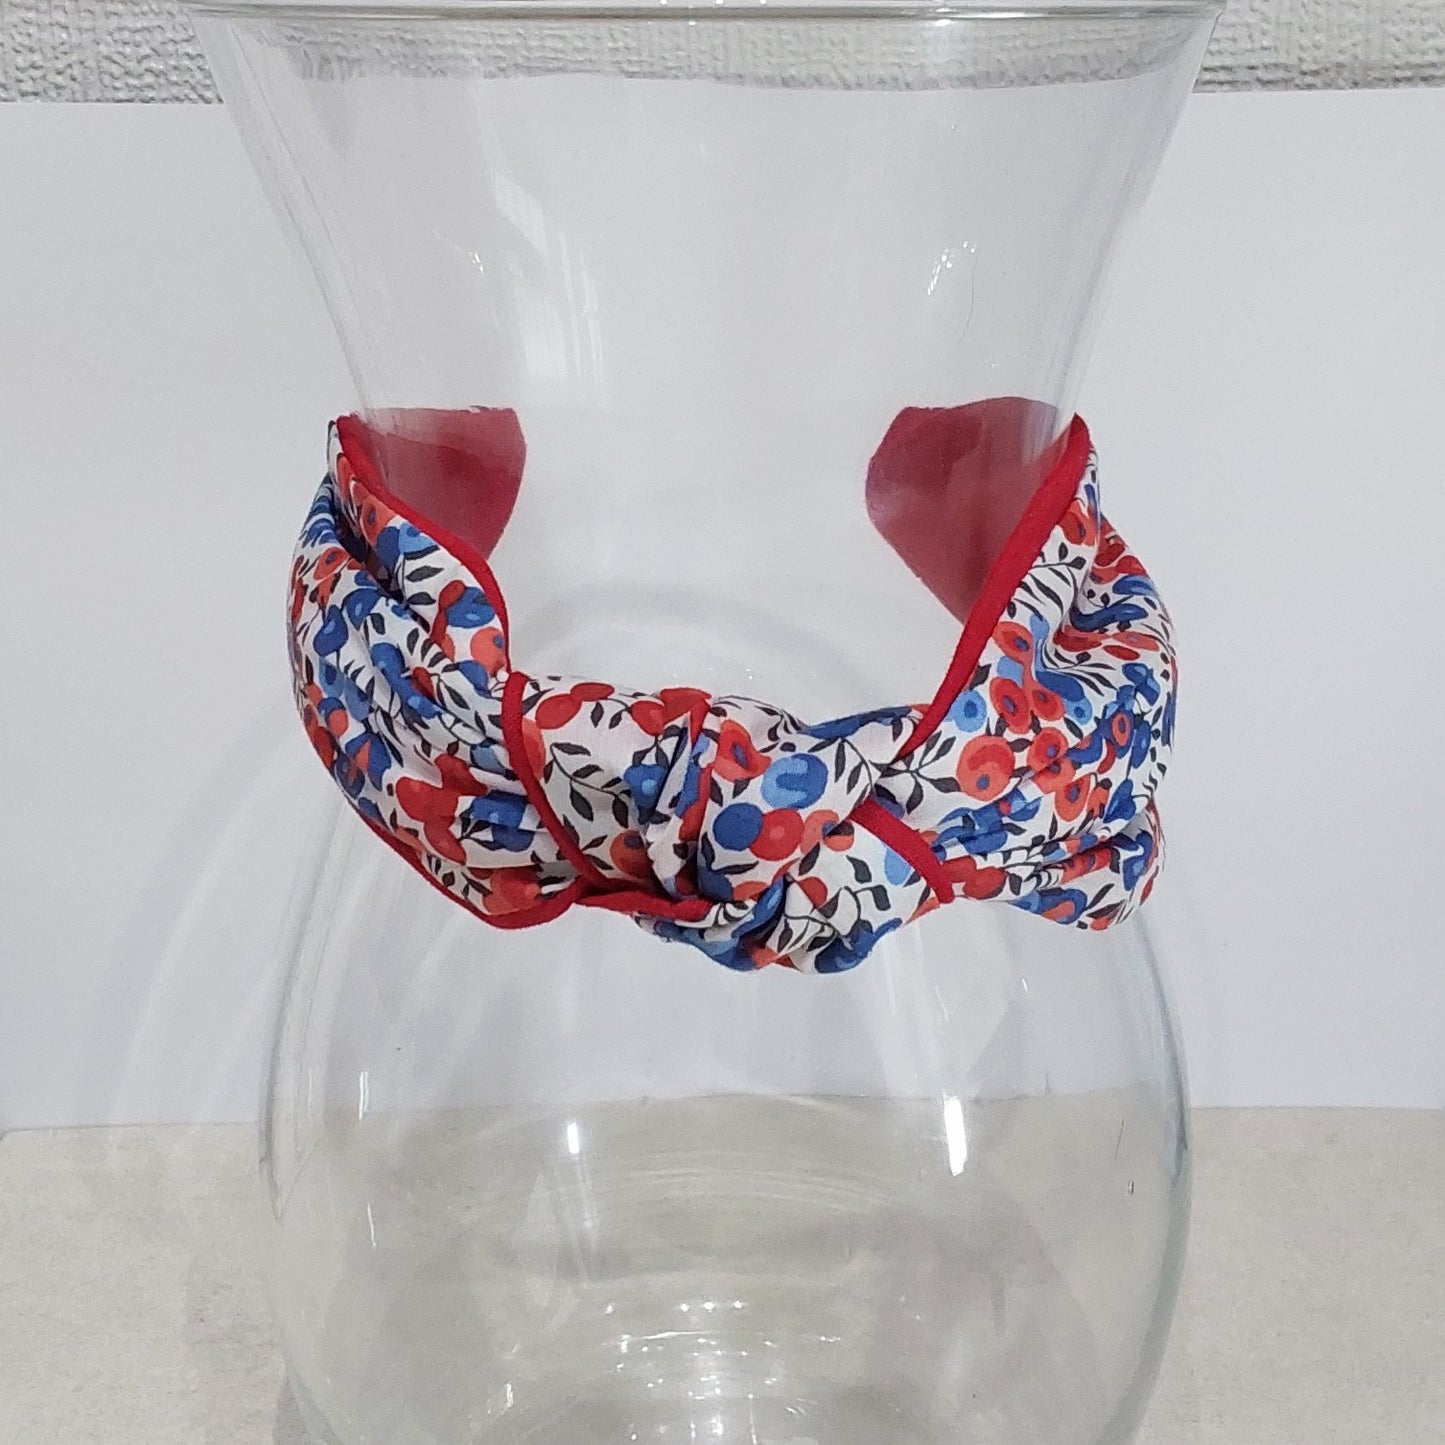 Hairband Liberty of London Wiltshire Berry Red Blue Cotton Fabric Bespoke Top Knot Headband